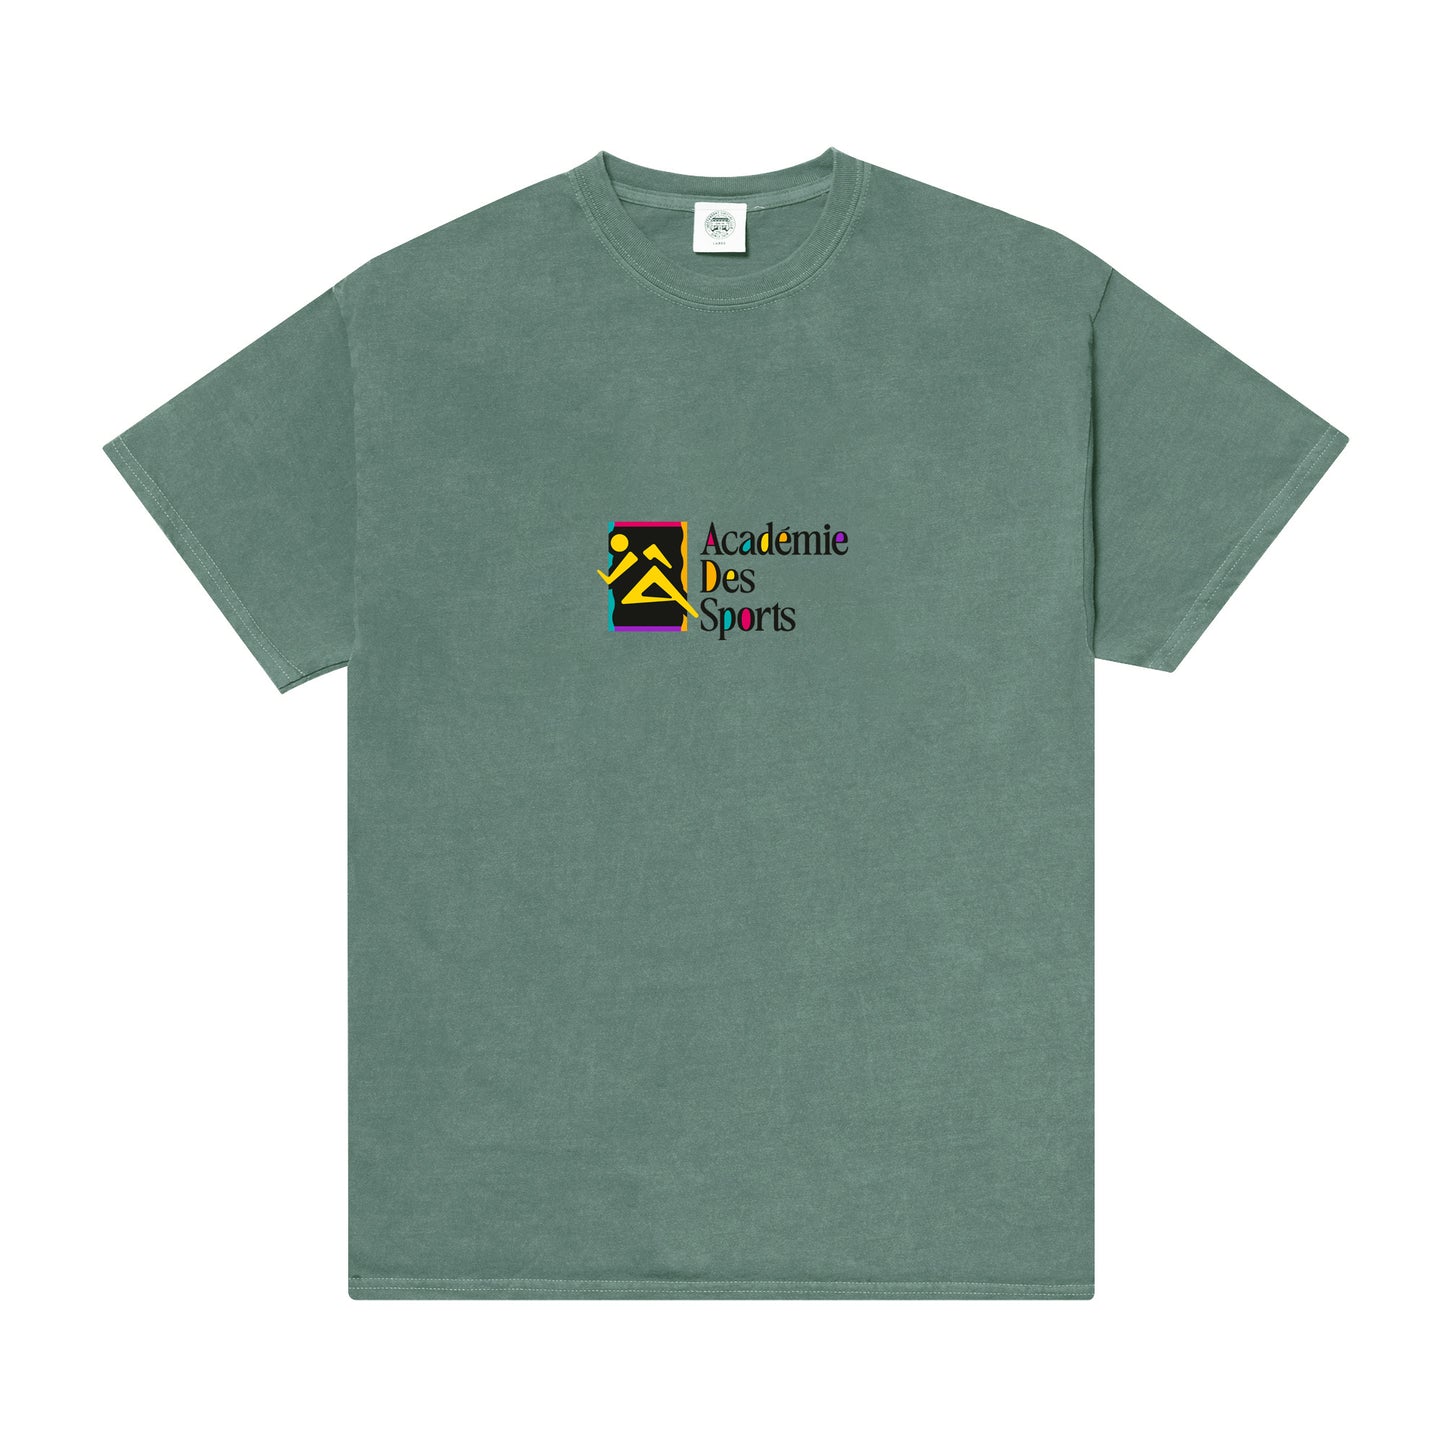 Vice 84 *10 Years Of* 'Retro Runner' Vintage Washed Tee - Sage